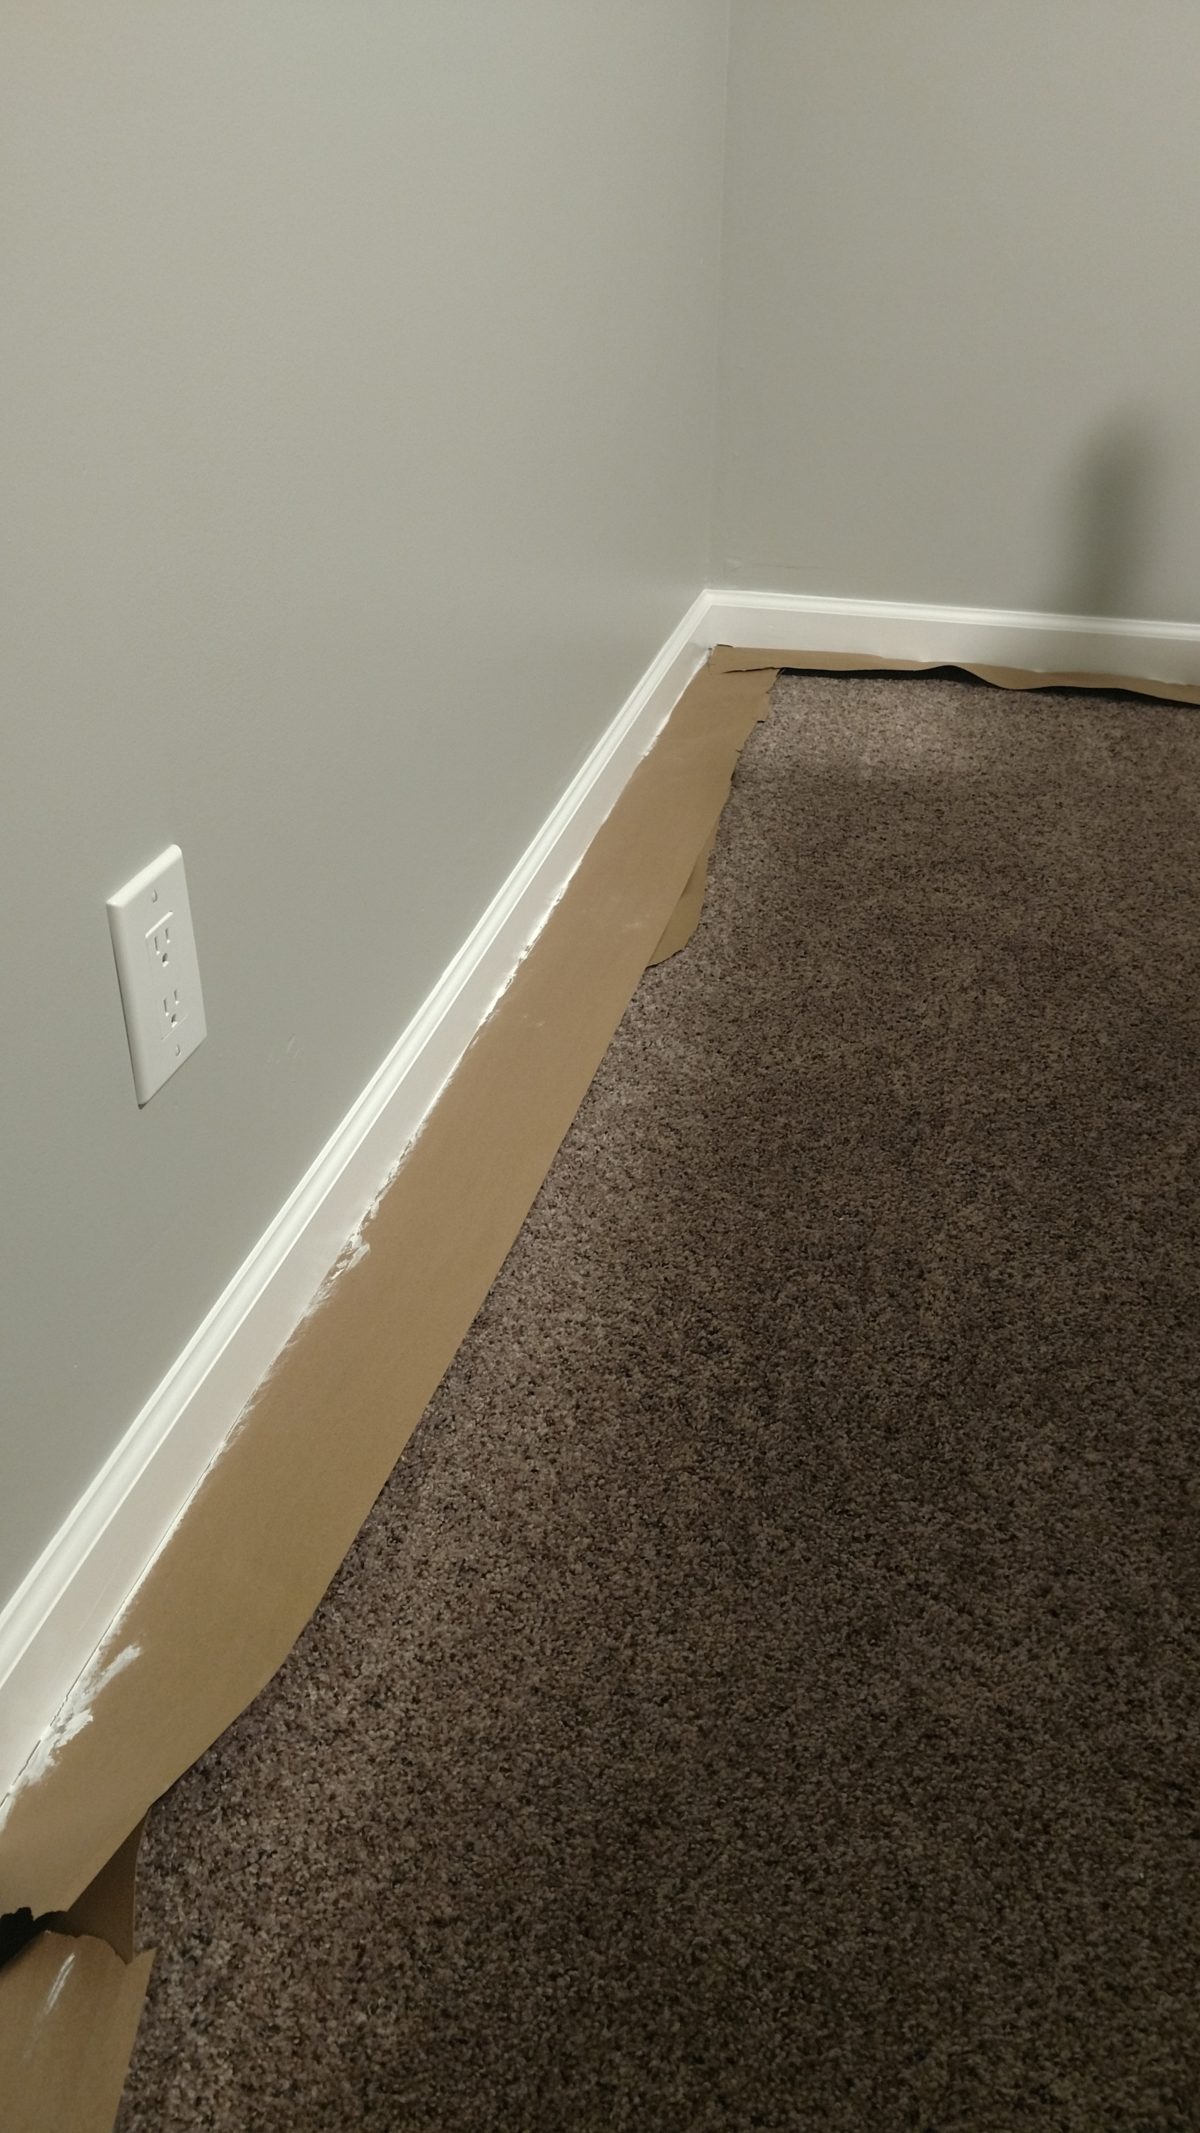 Use builders paper to protect carpet while painting baseboard